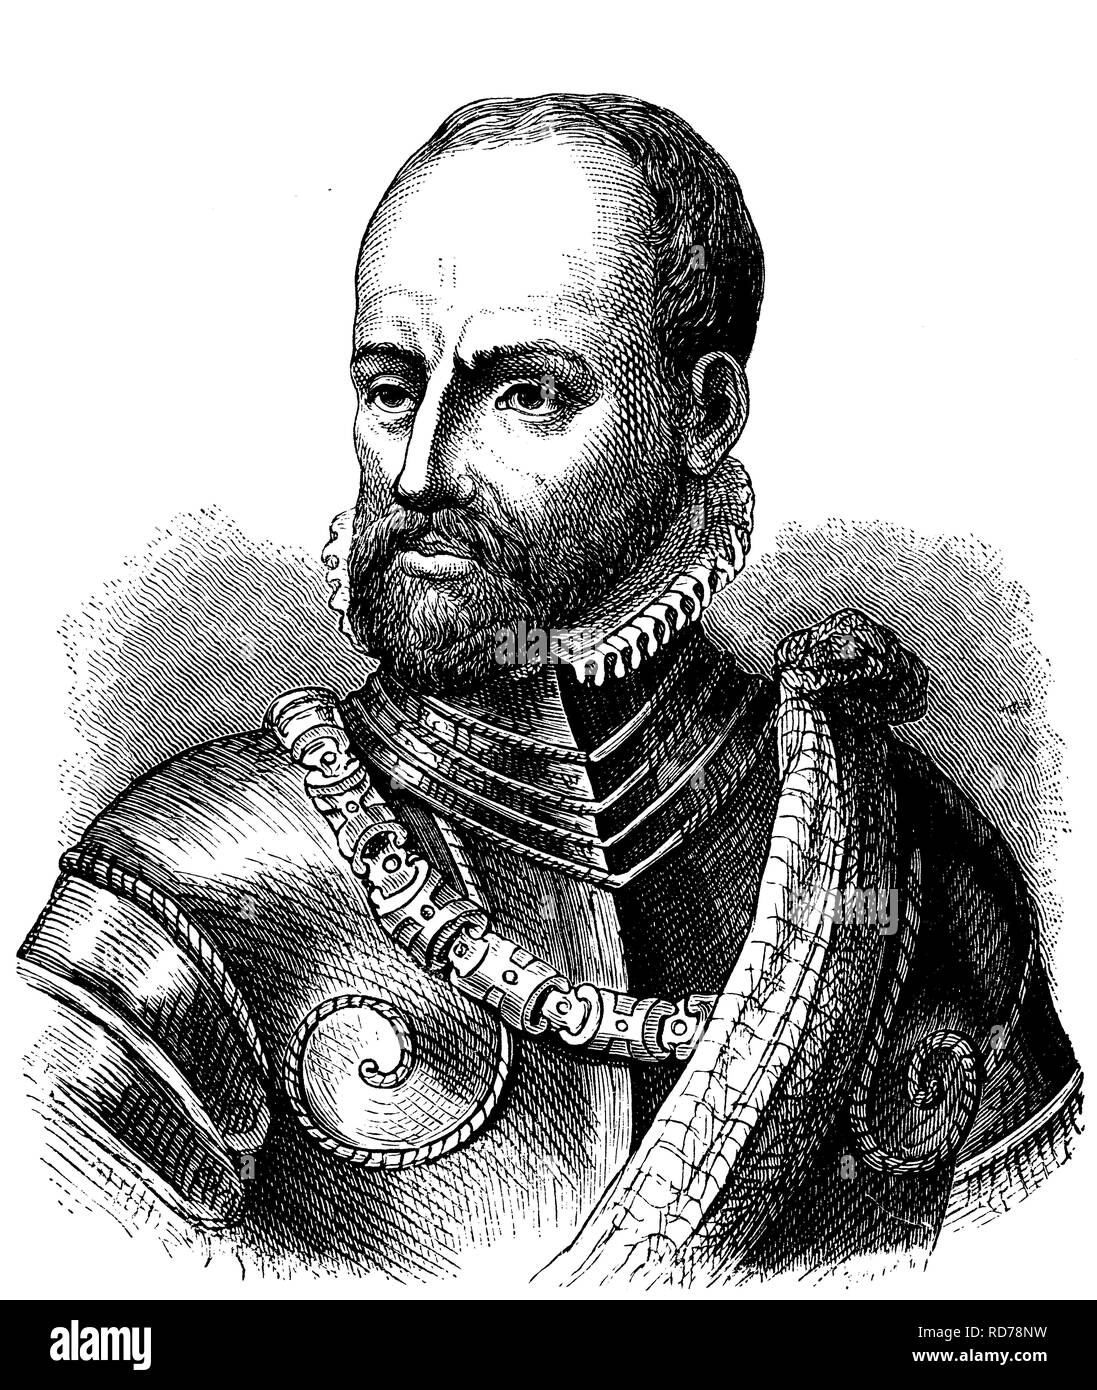 Philippe de Montmorency, Count of Horn, 1518 - 1568, Dutch admiral, freedom fighter, knight of the Order of the Golden Fleece Stock Photo